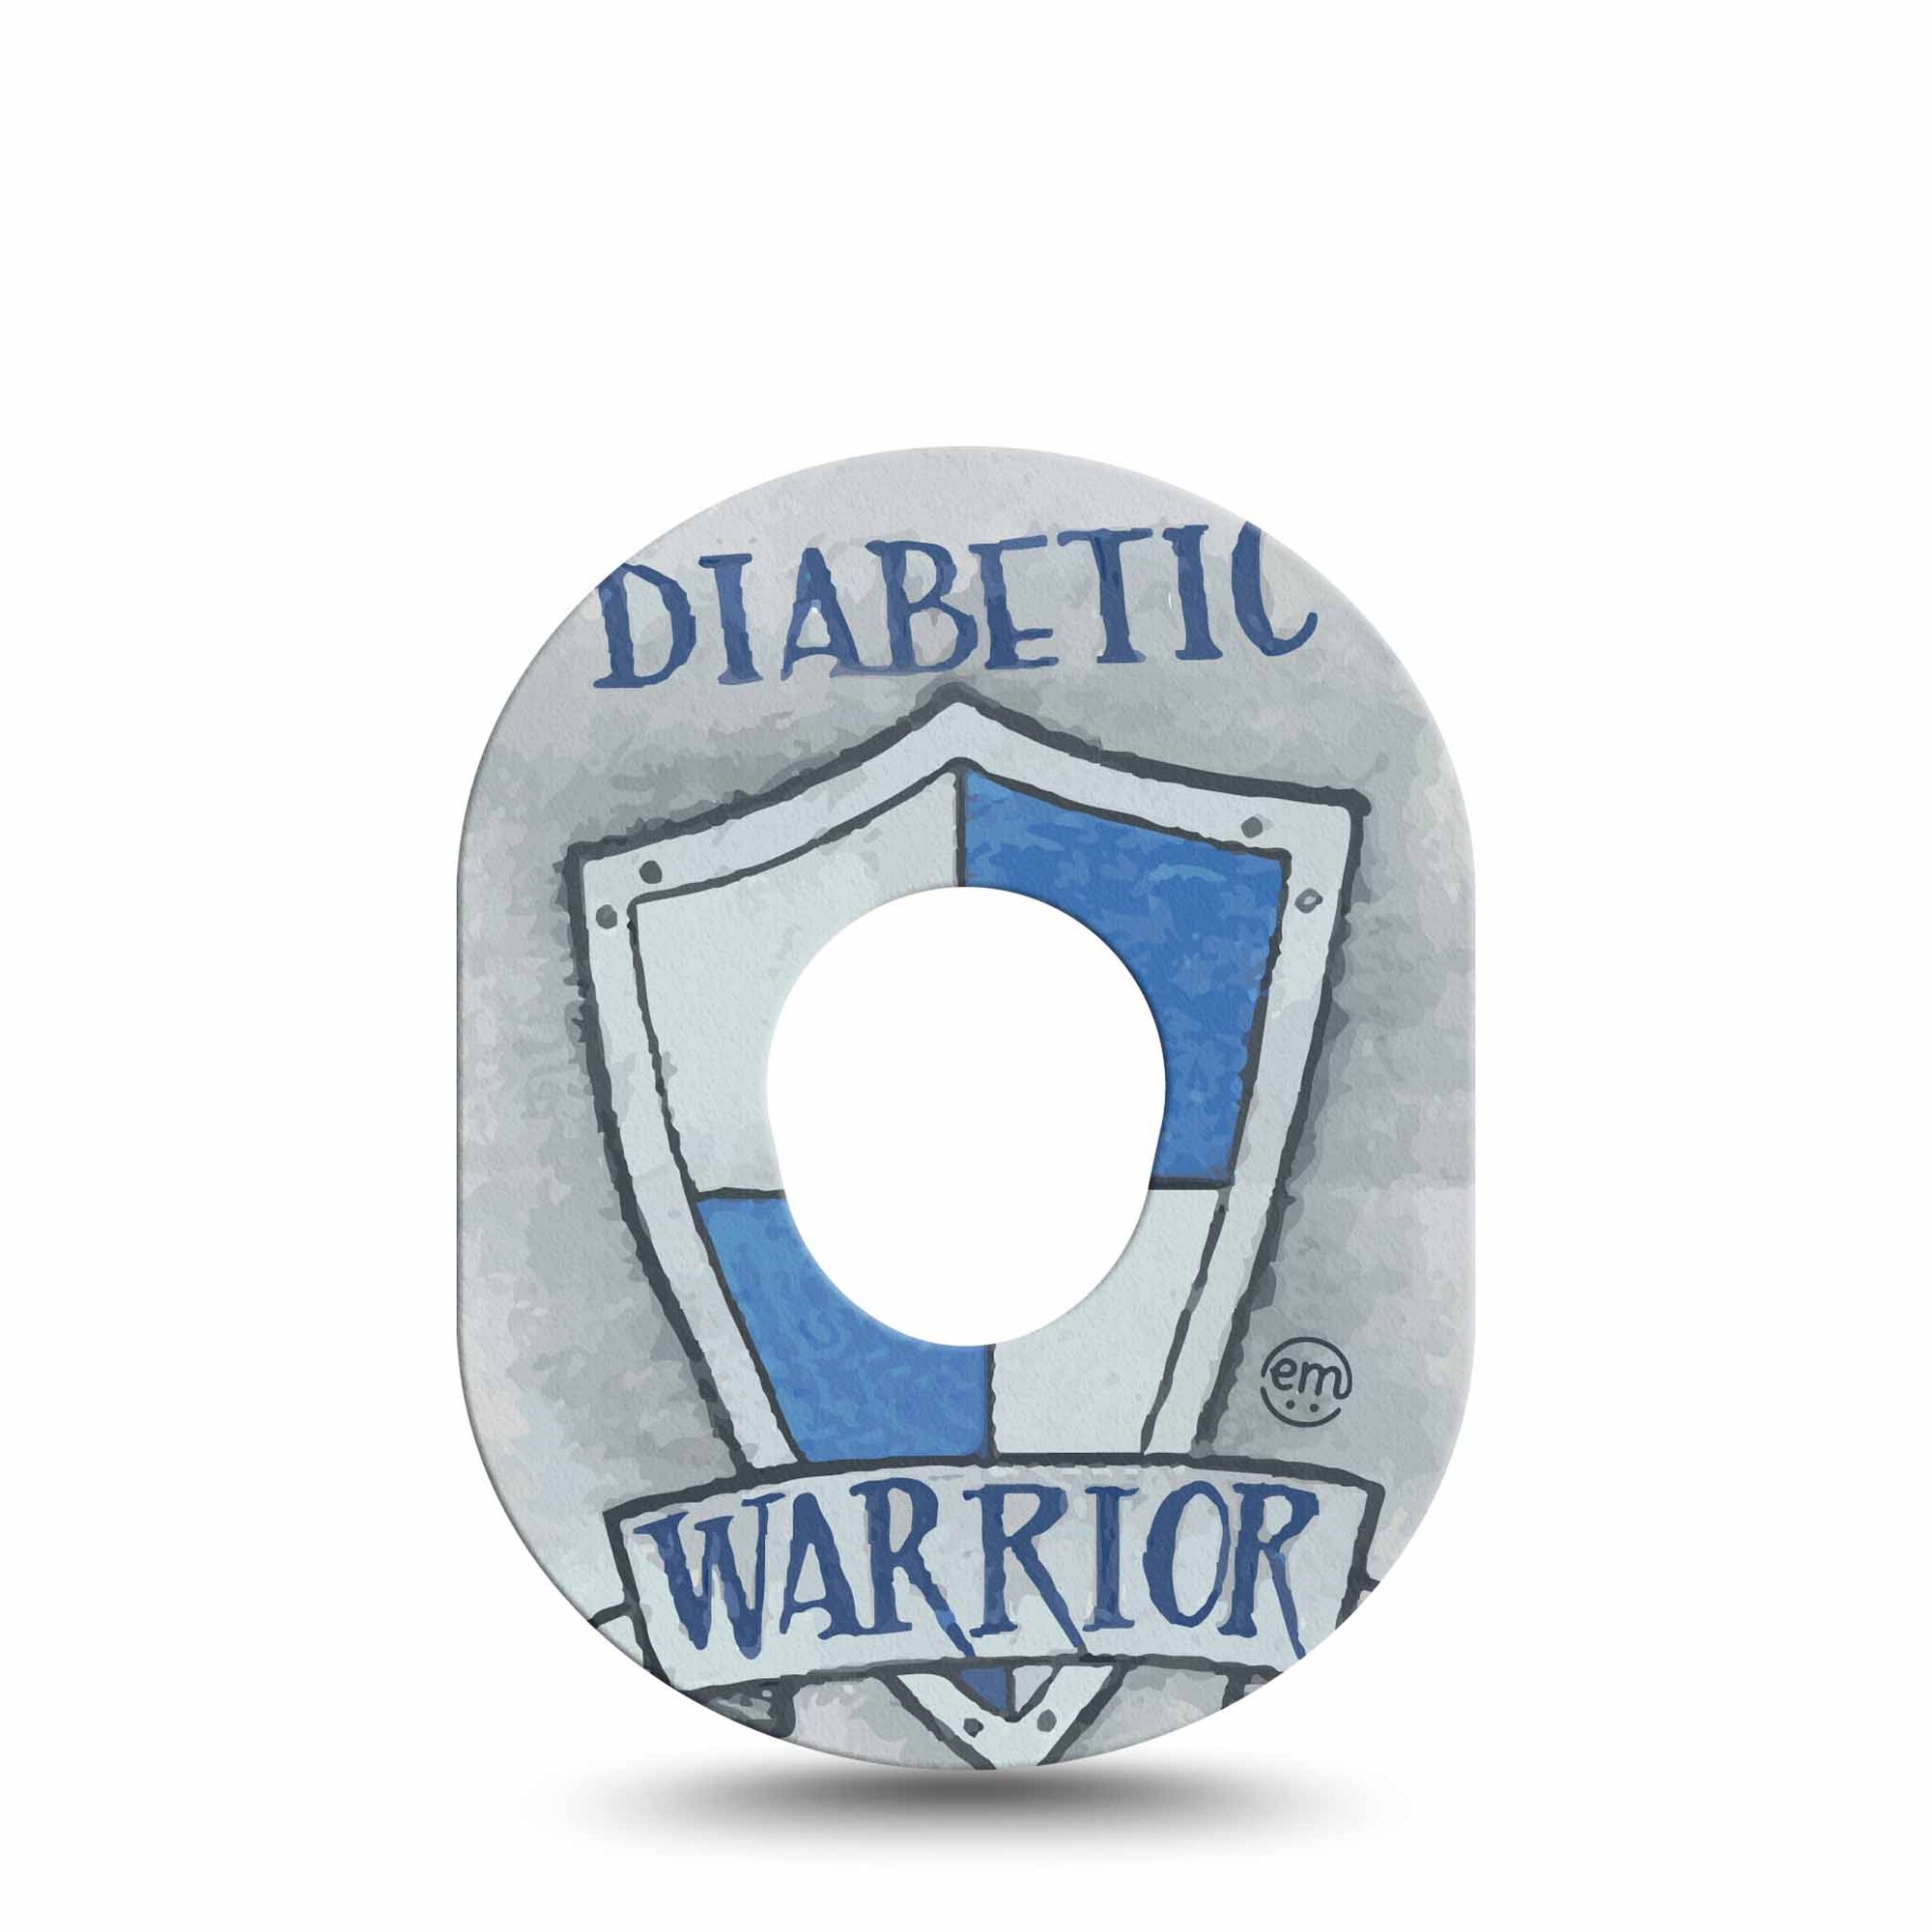 ExpressionMed Diabetic Warrior Dexcom G7 Tape, Single, Warrior Shield, CGM Adhesive Patch Design